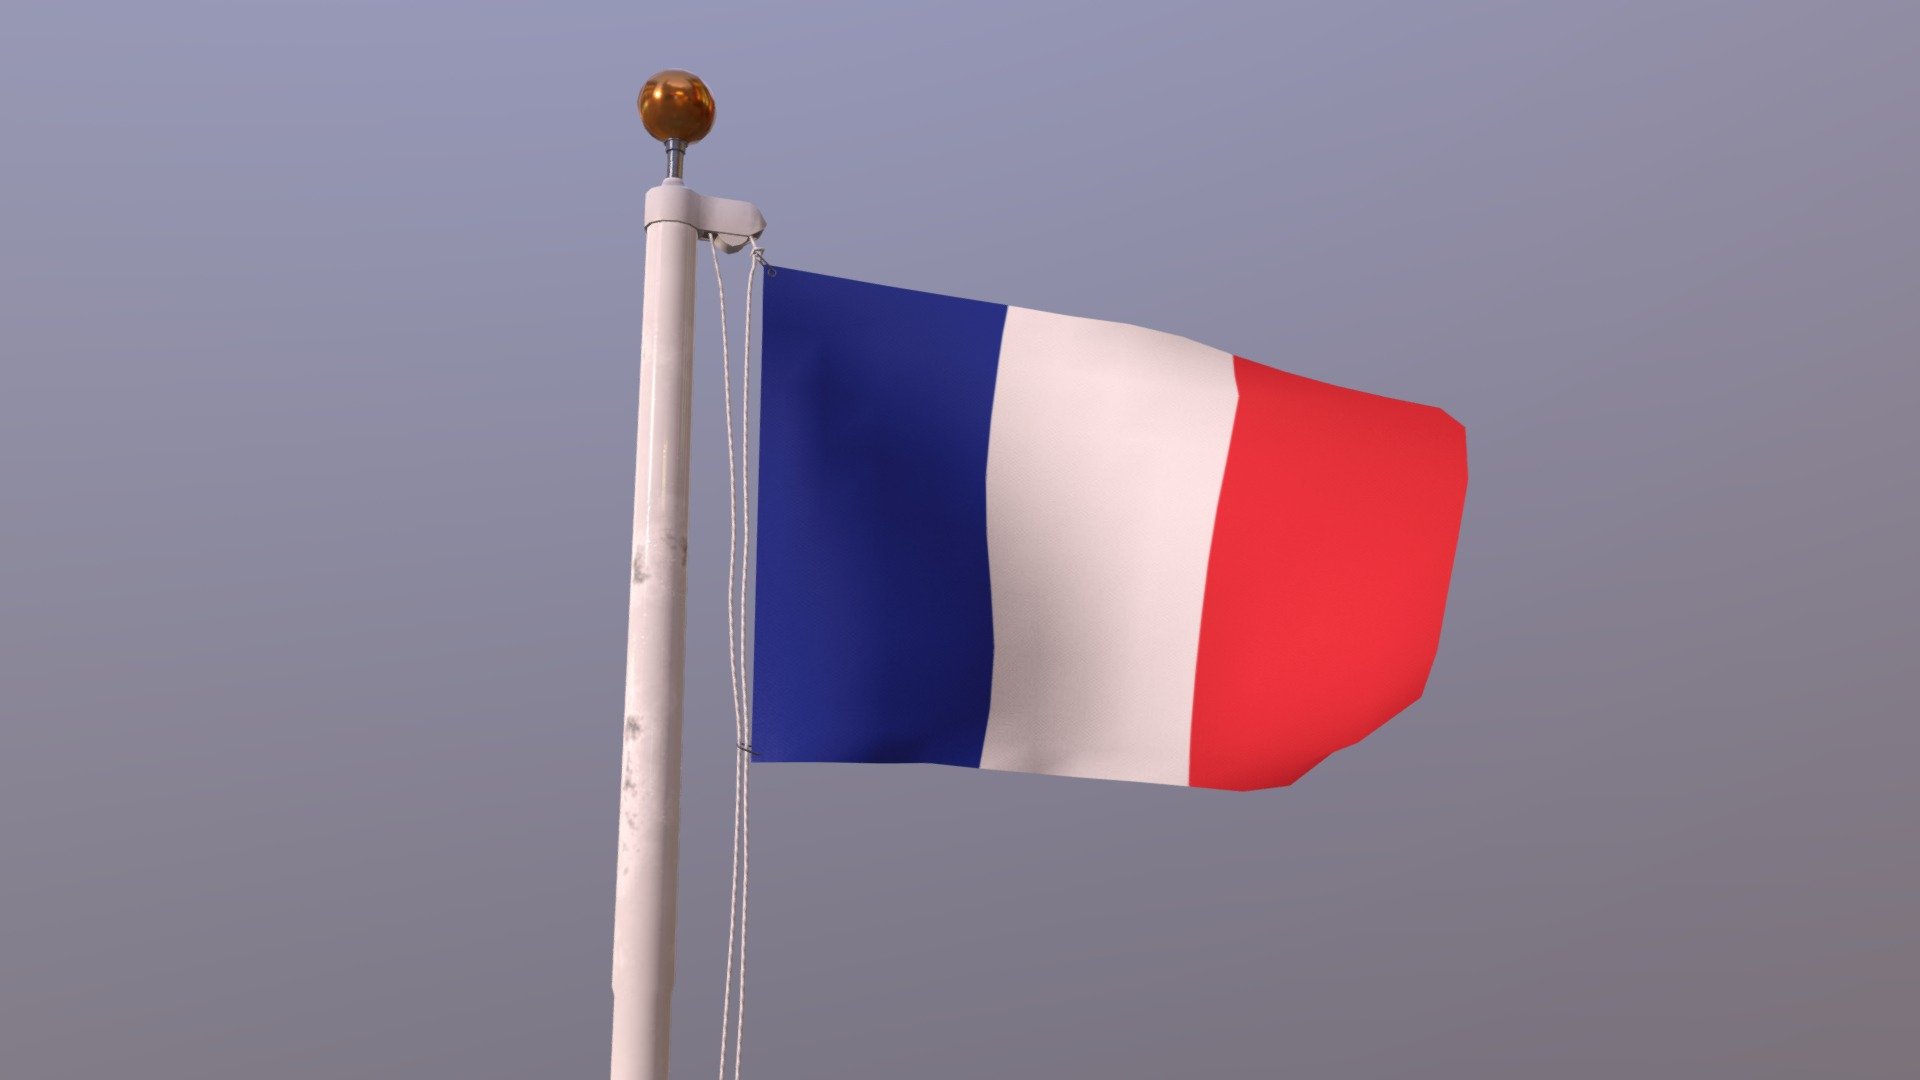 Flag of France (waving in the wind) | Drapeau de la France (agitant au vent)

A low poly 3D model of an animated and rigged flag. The low poly flag was modeled and prepared for low-poly style renderings, general visualization, background.

UV Layout maps and Image Textures resolutions: 1024x1024 px; PBR Textures created and baked (SimpleBake) in Blender and included diffuse, roughness, metalness and normal maps. 
The entourage is separate object, 2D girl for visual scale (175 cm) plus terrain, and have simple material with colors and it's just for presentation.

The animation has 190 frames.

Details:

real world dimensions




Flag cloth size

-length: 140 cm
-width: 90 cm




Flagpole size

-diameter: 10 cm
-height: 680 cm

v.7 - Flag of France (animated) - 3D model by mihais (@m1hais) 3d model